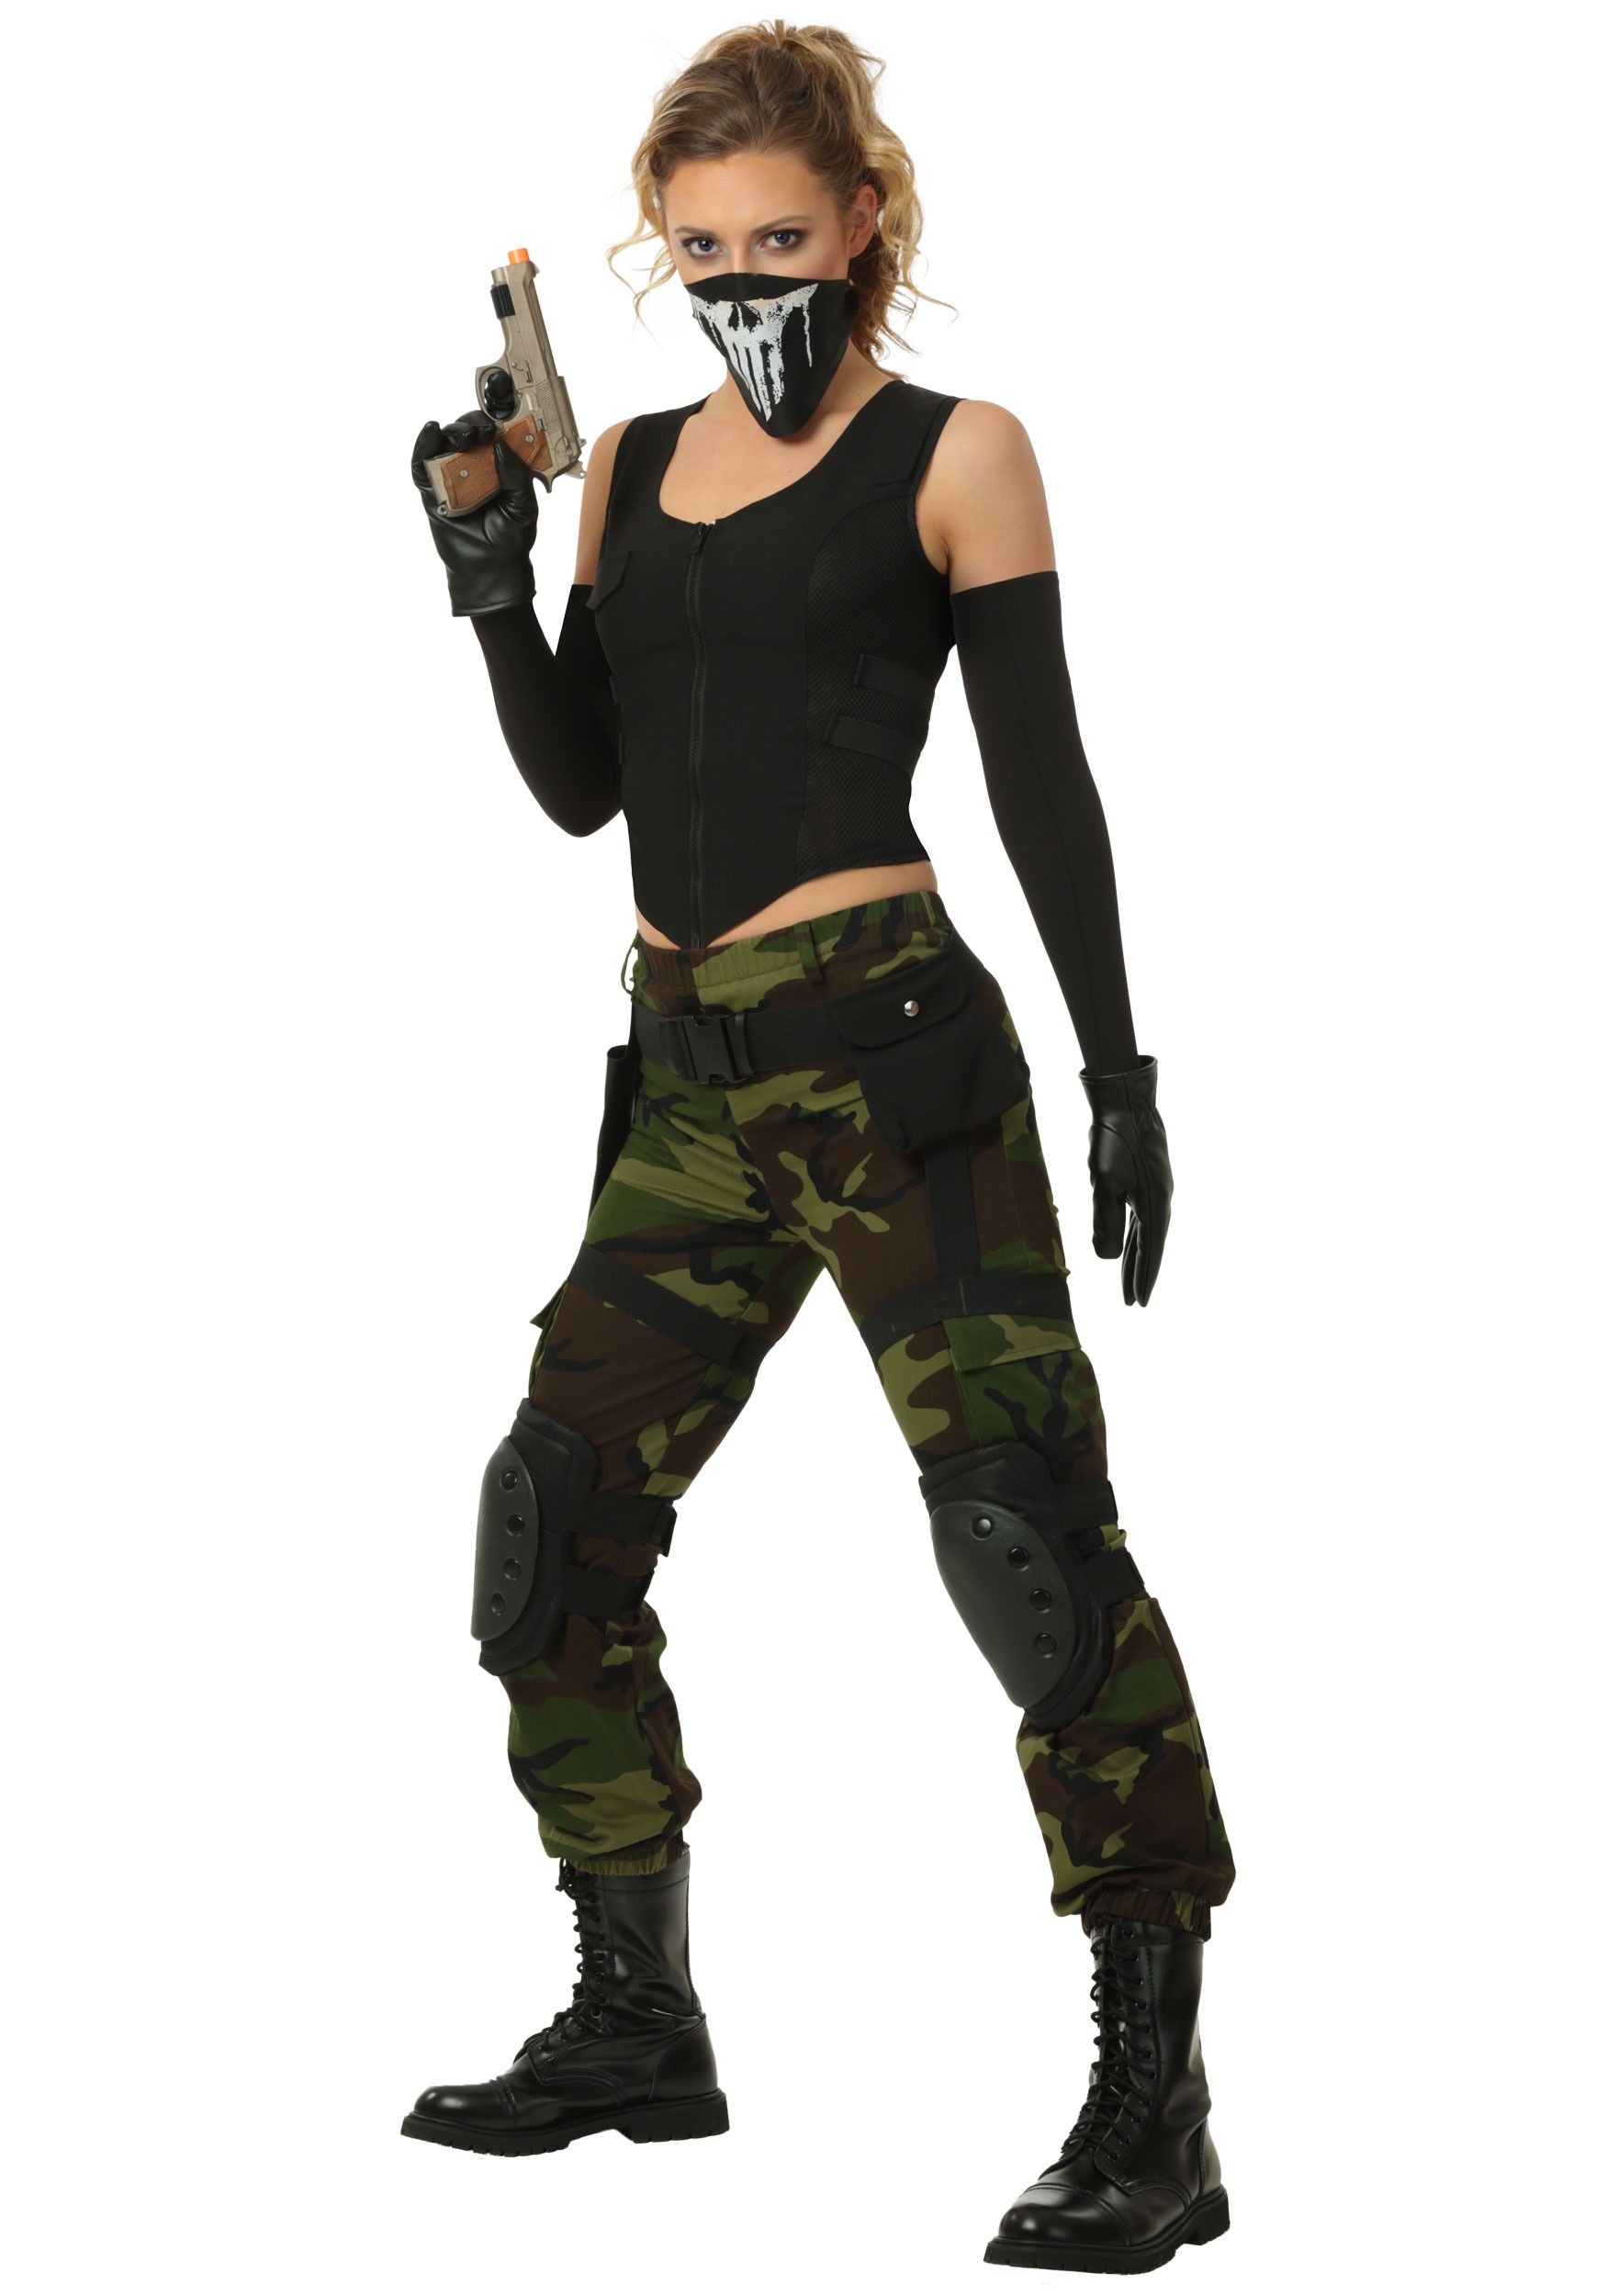 https://images.halloweencostumes.com/products/38482/1-1/fighting-soldier-womens-plus-size-costume.jpg